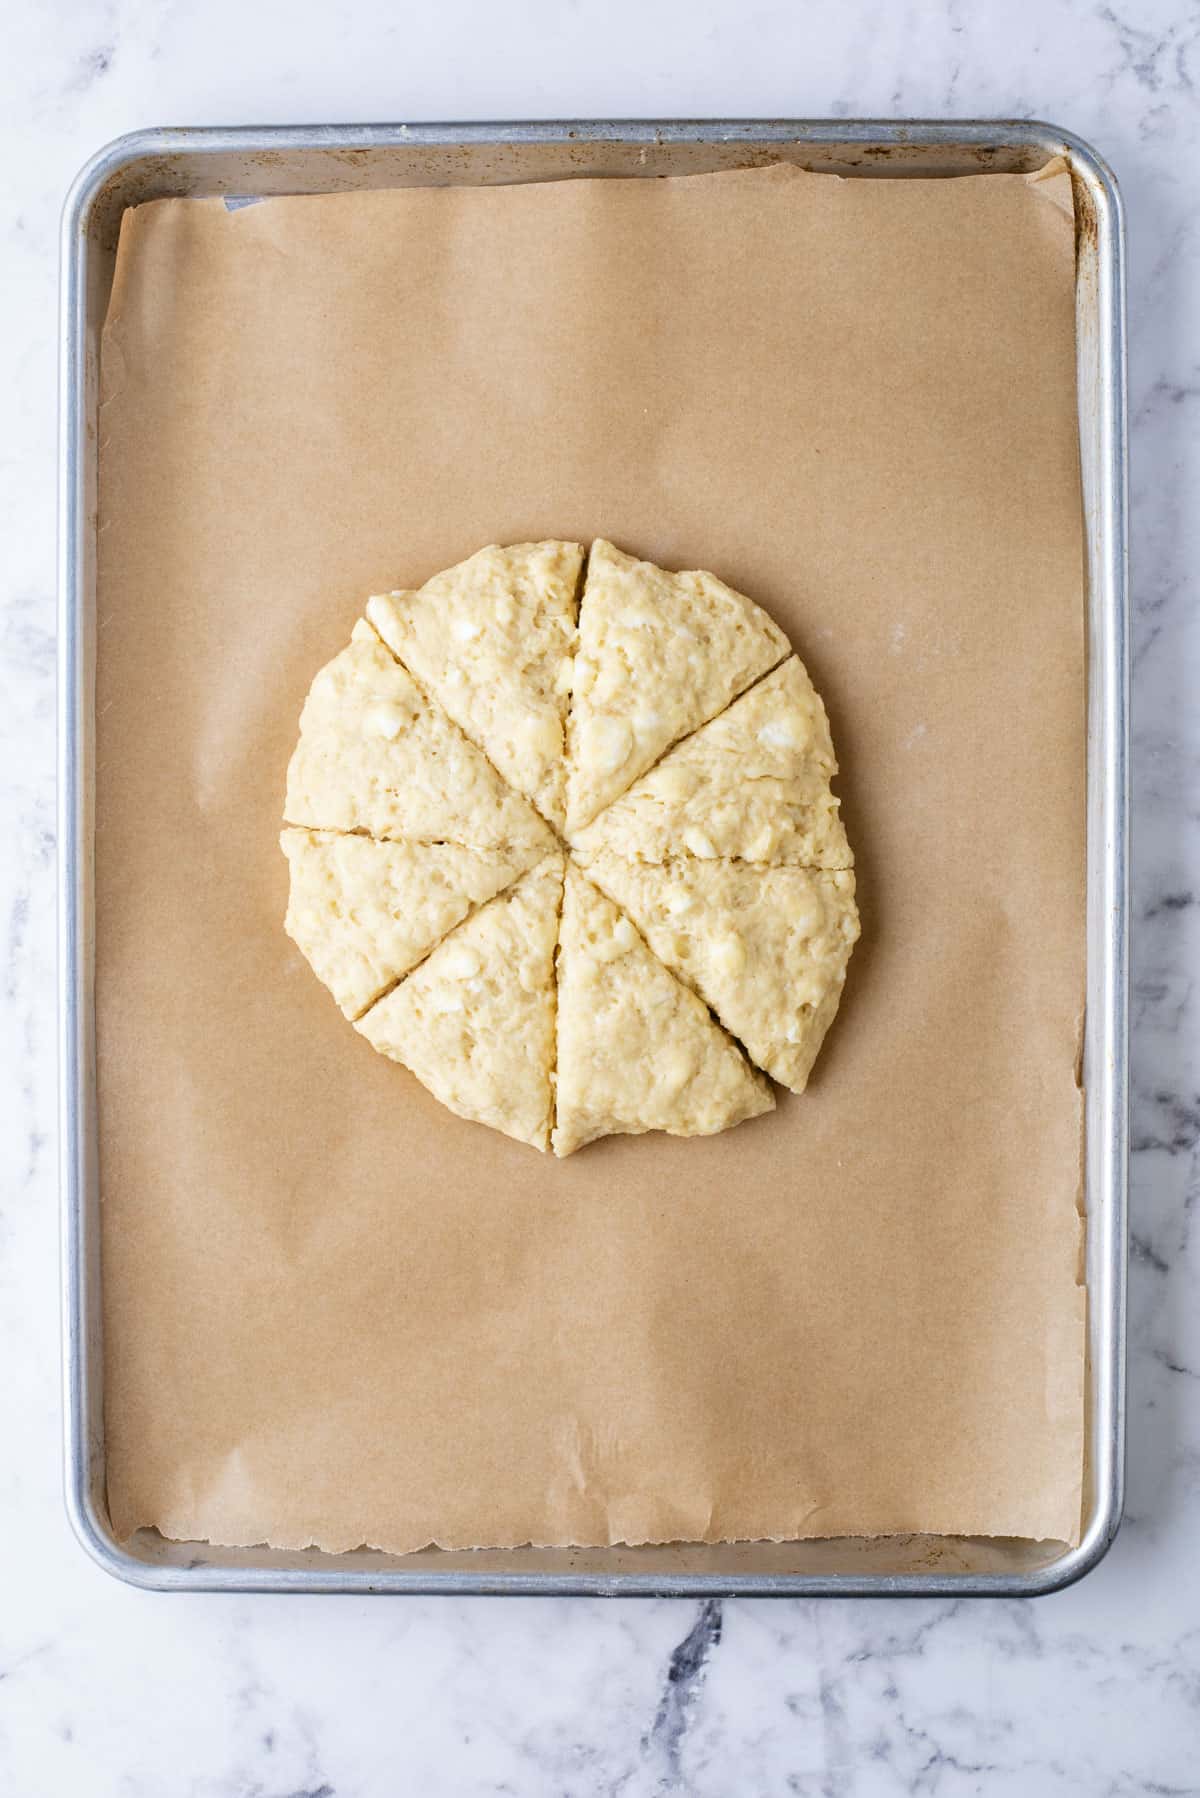 a round disc of scone dough sliced into wedges on a baking sheet lined with parchment paper